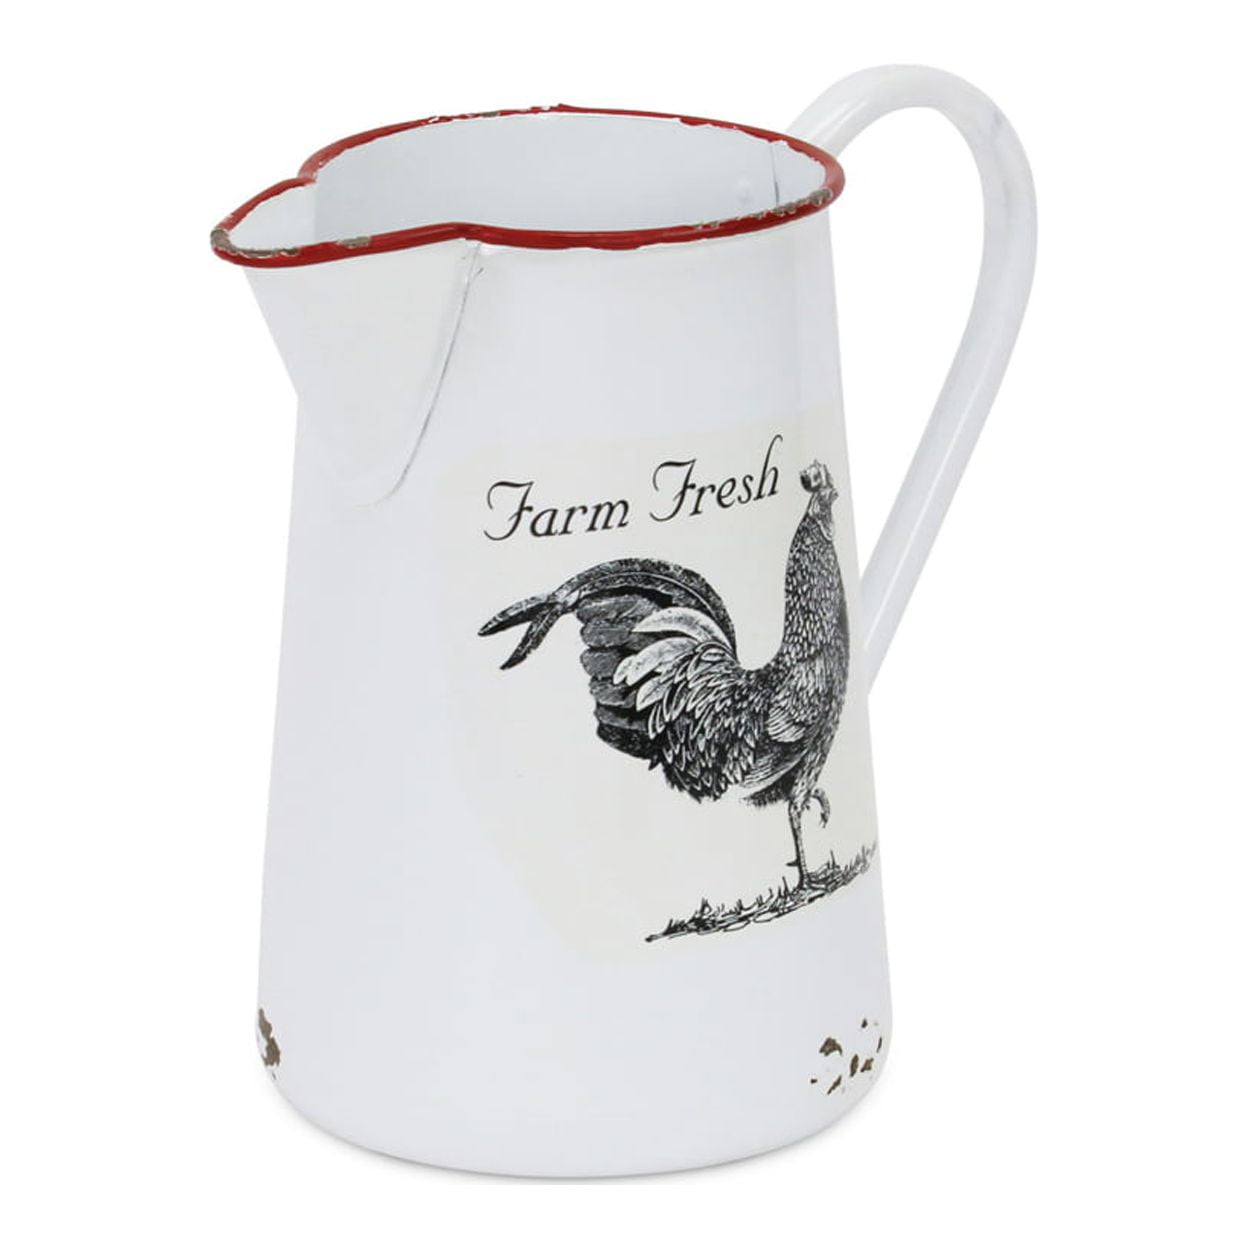 Picture of Cheungs 5021 White Lacquered Metal Pitcher Decor with Chicken Decal